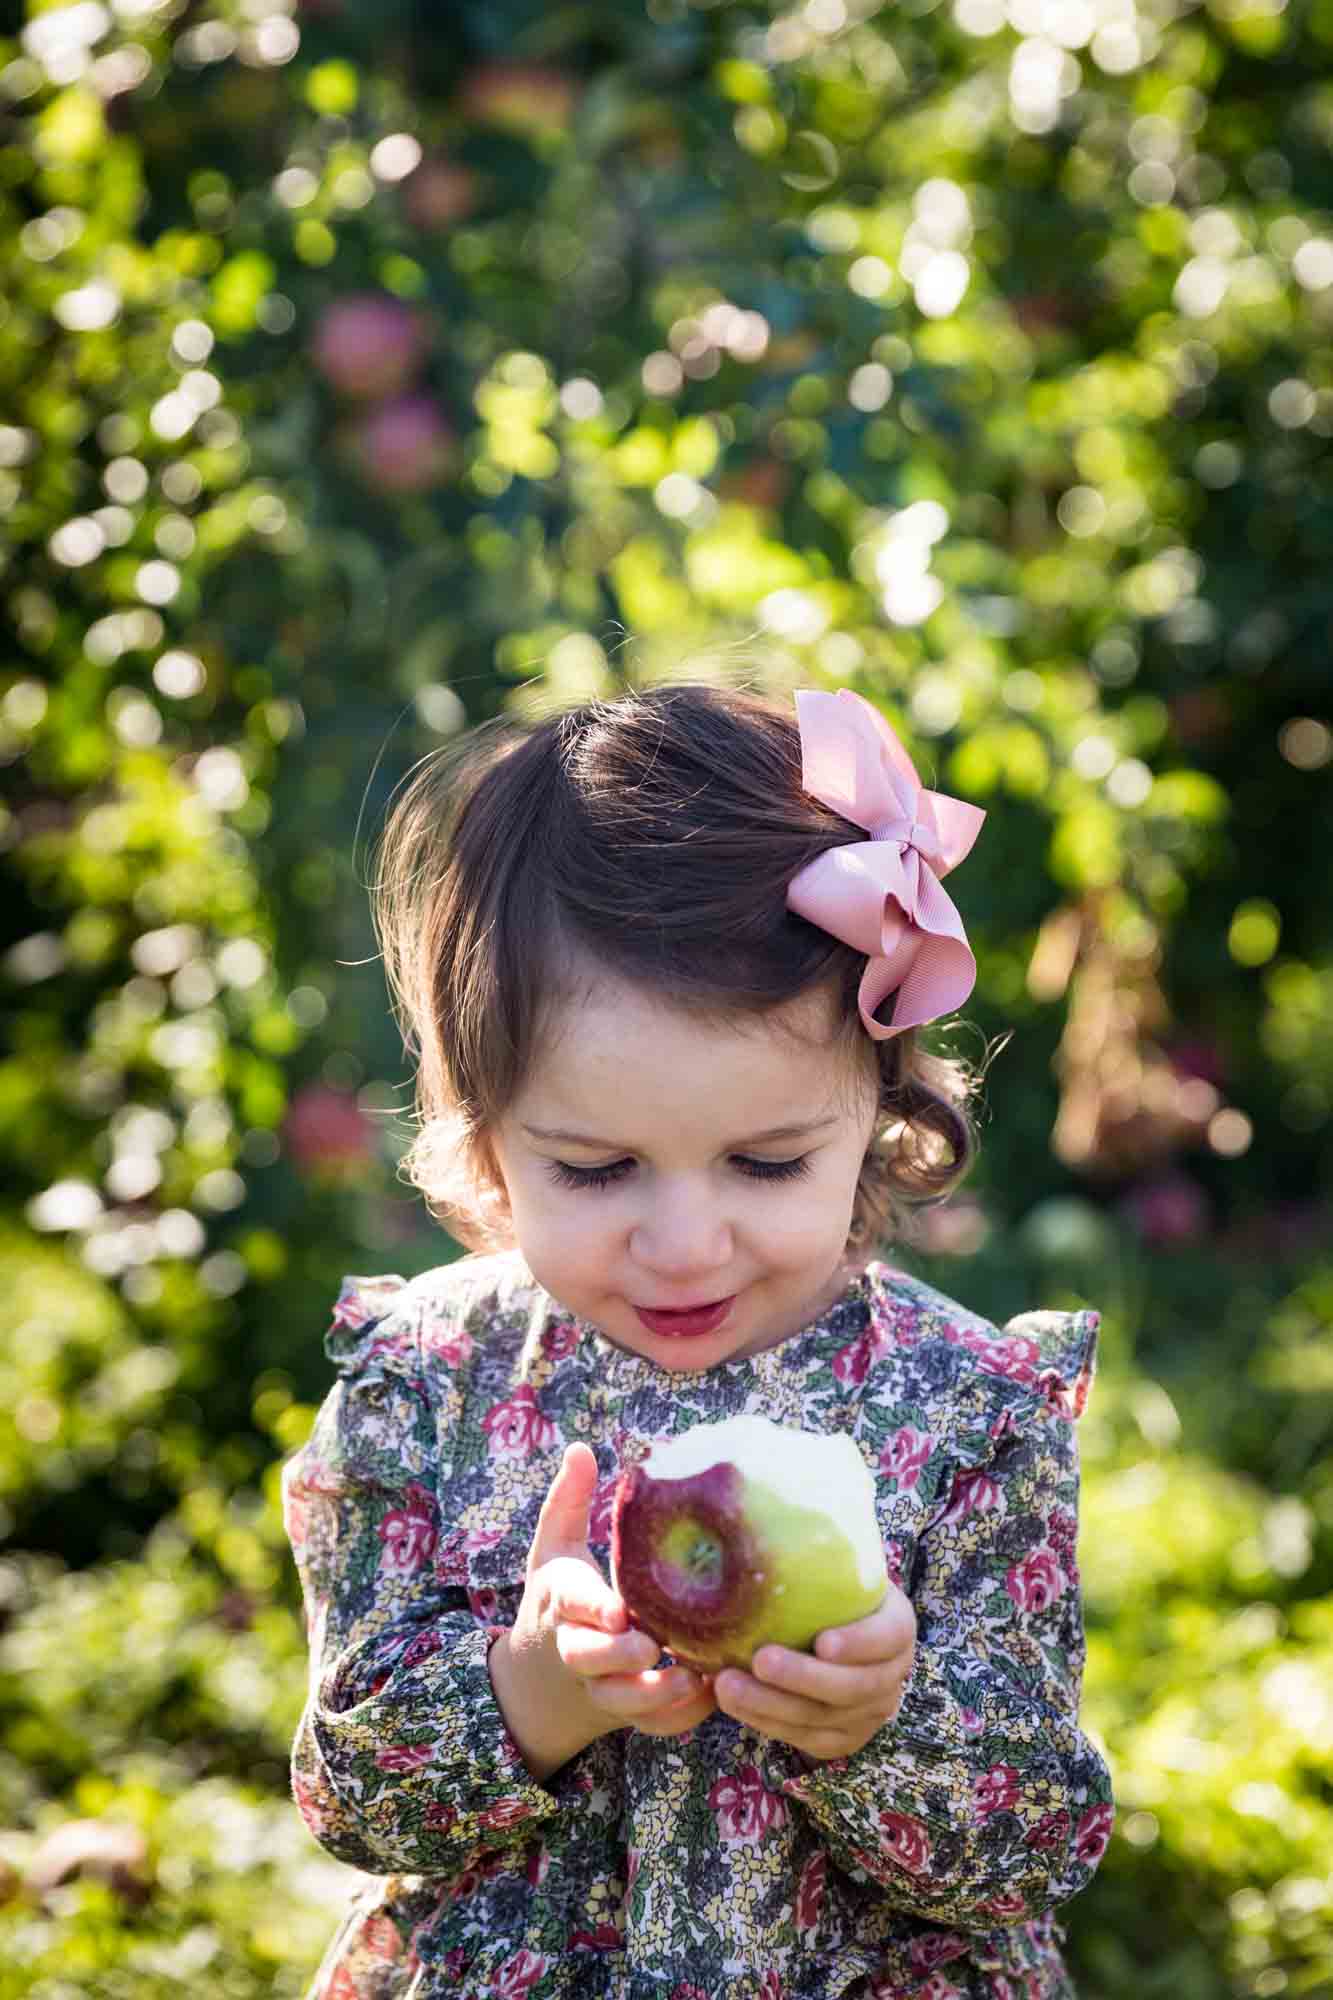 Little girl with pink bow in hair looking down at apple for an article on tips for apple picking family photos